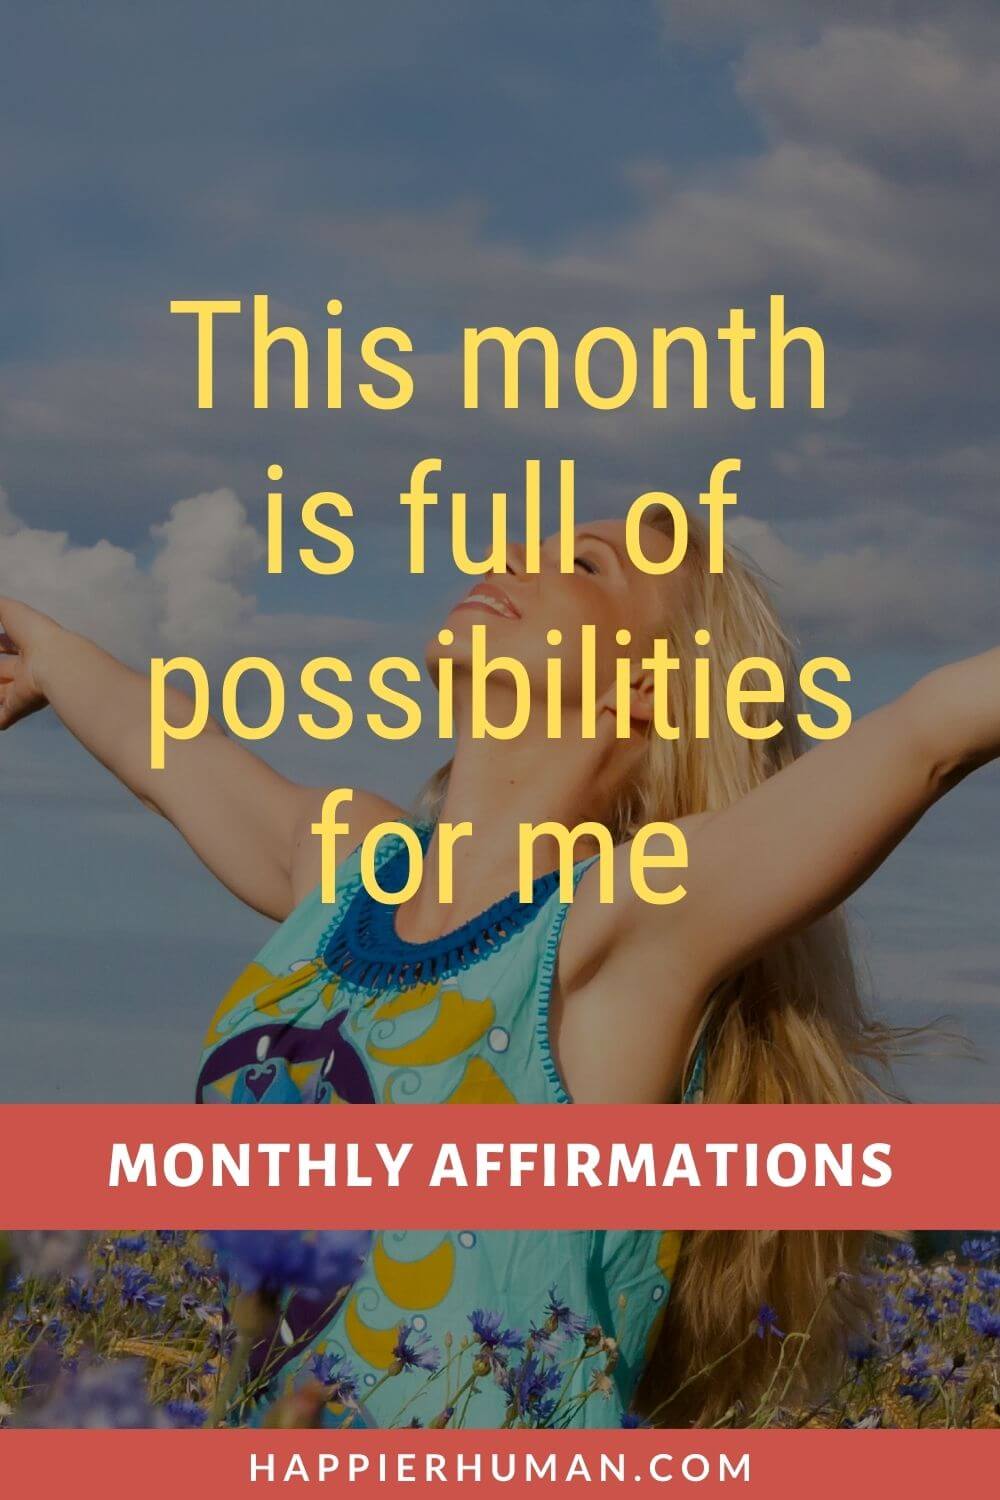 Monthly Affirmations - This month is full of possibilities for me | monthly affirmations 2022 | powerful daily affirmations | positive affirmations examples